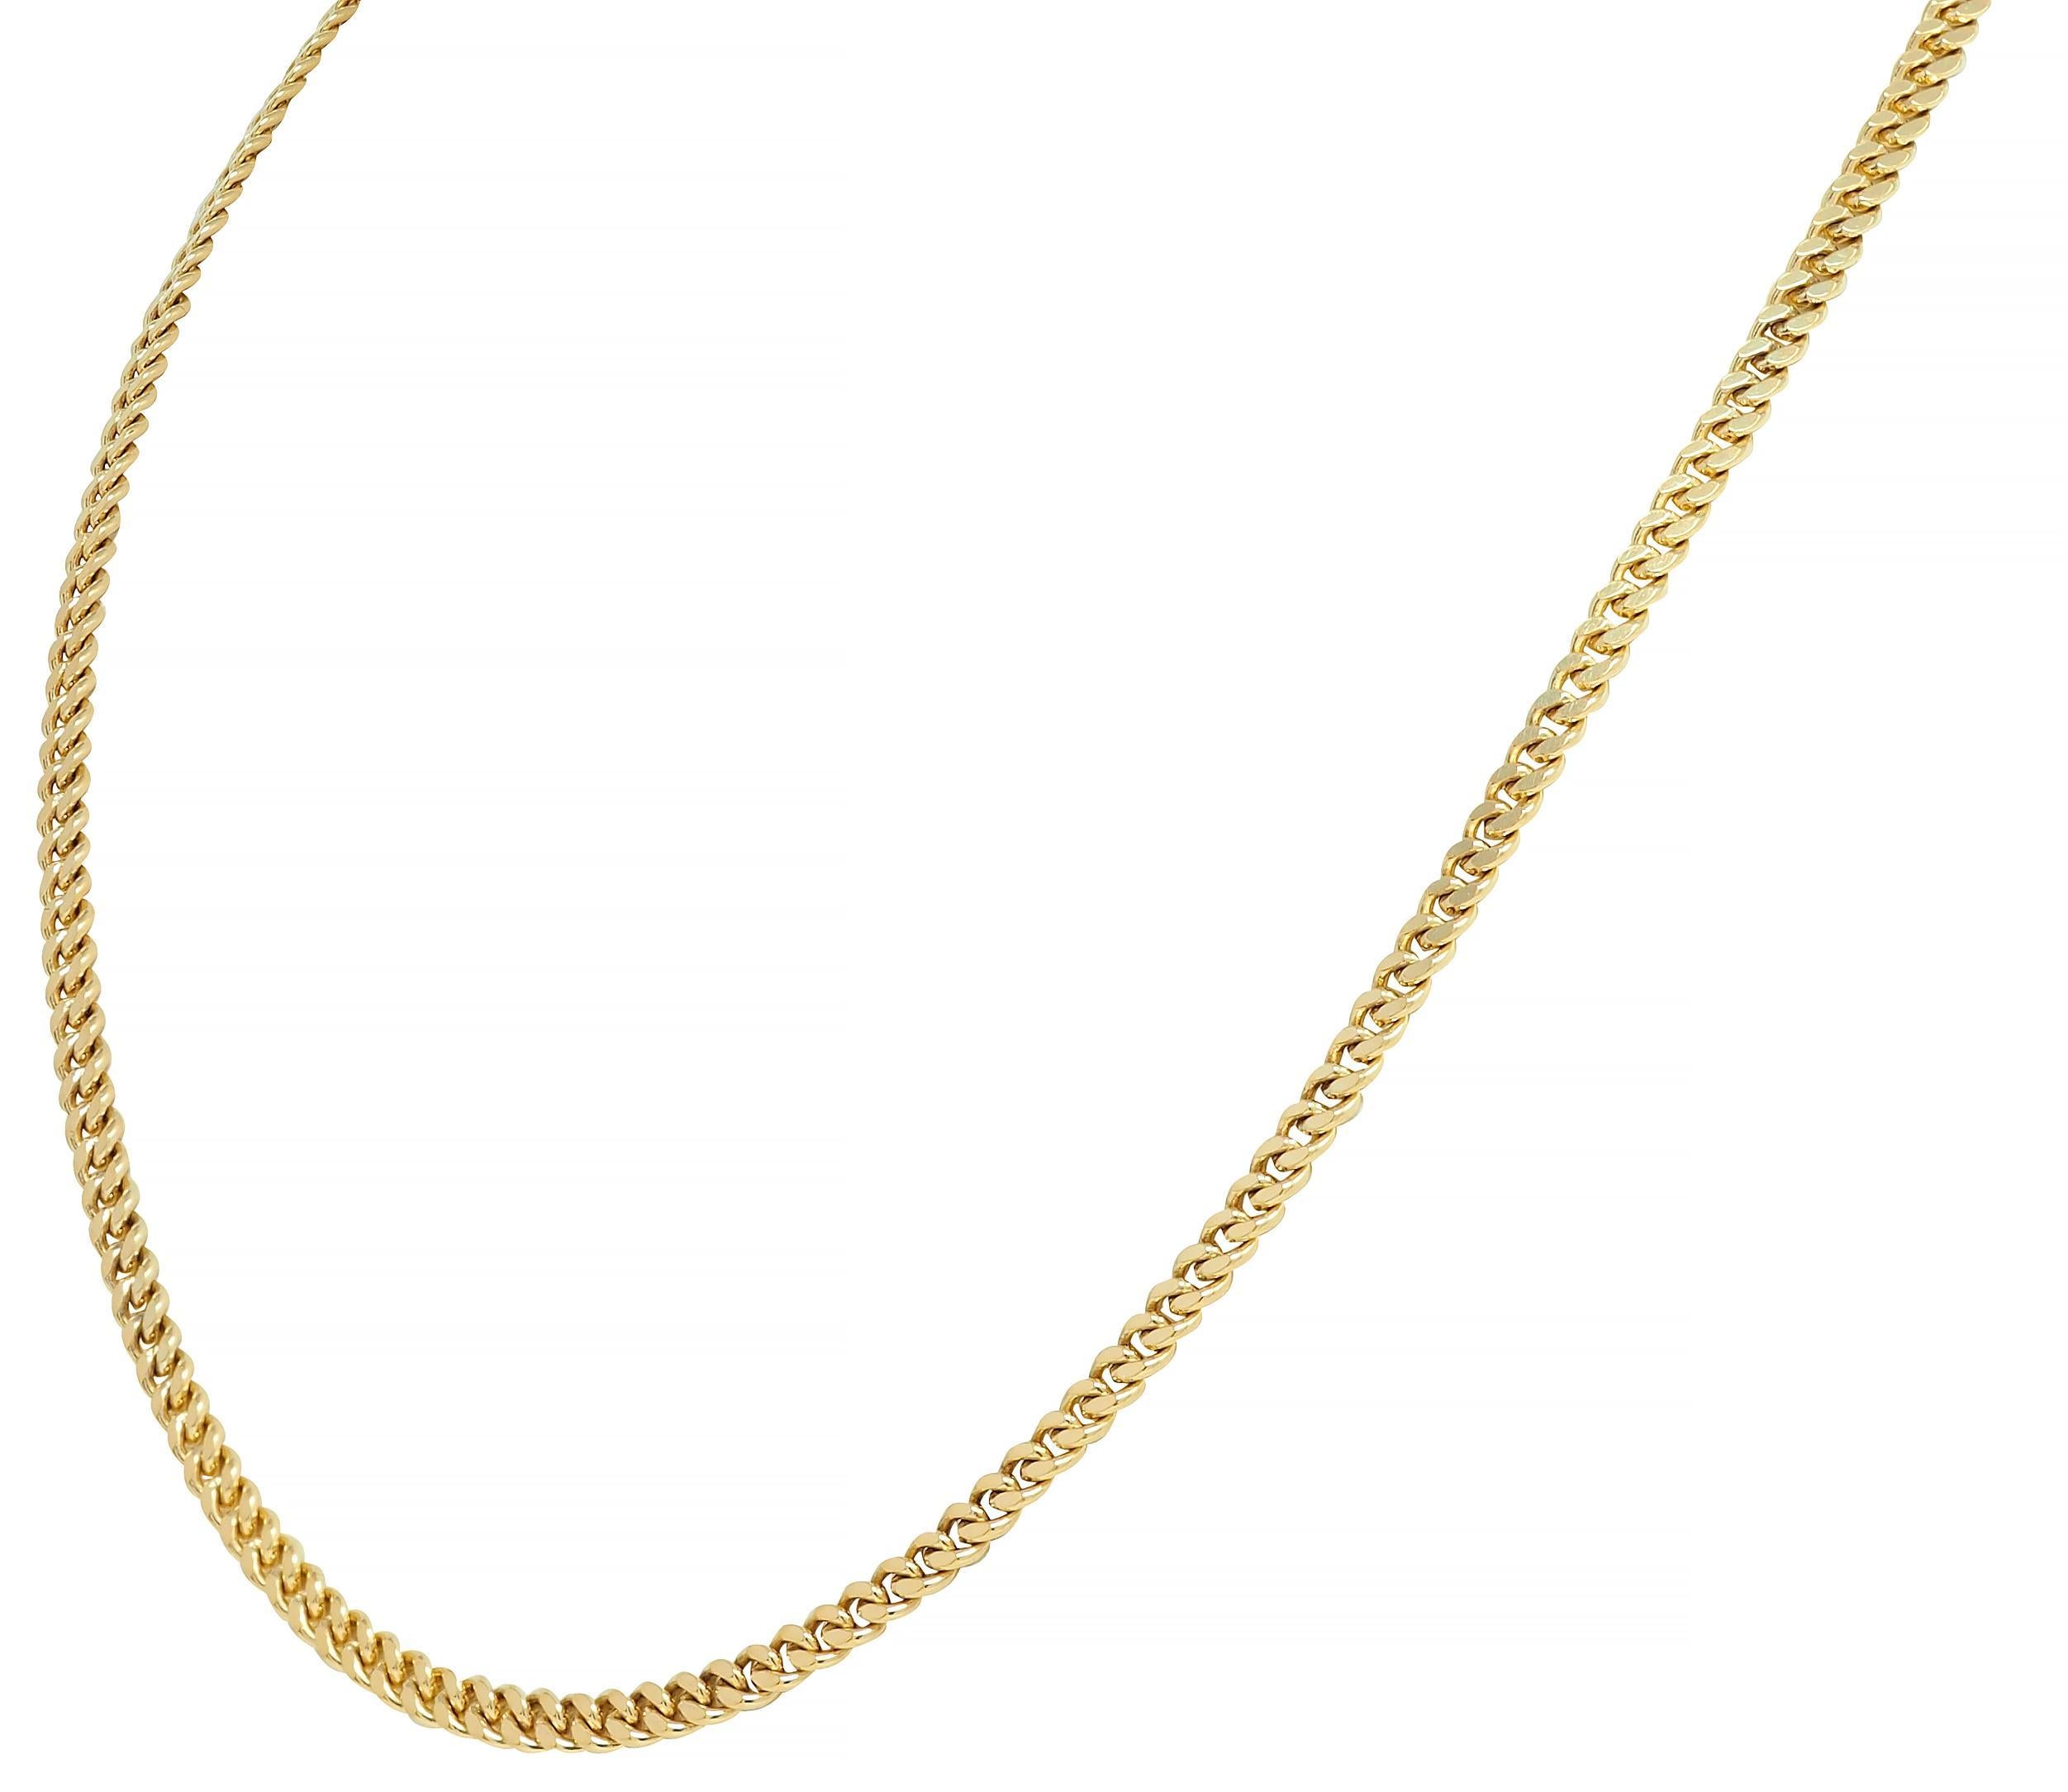 Vintage 18 Karat Yellow Gold Curb Link Chain Necklace For Sale 1